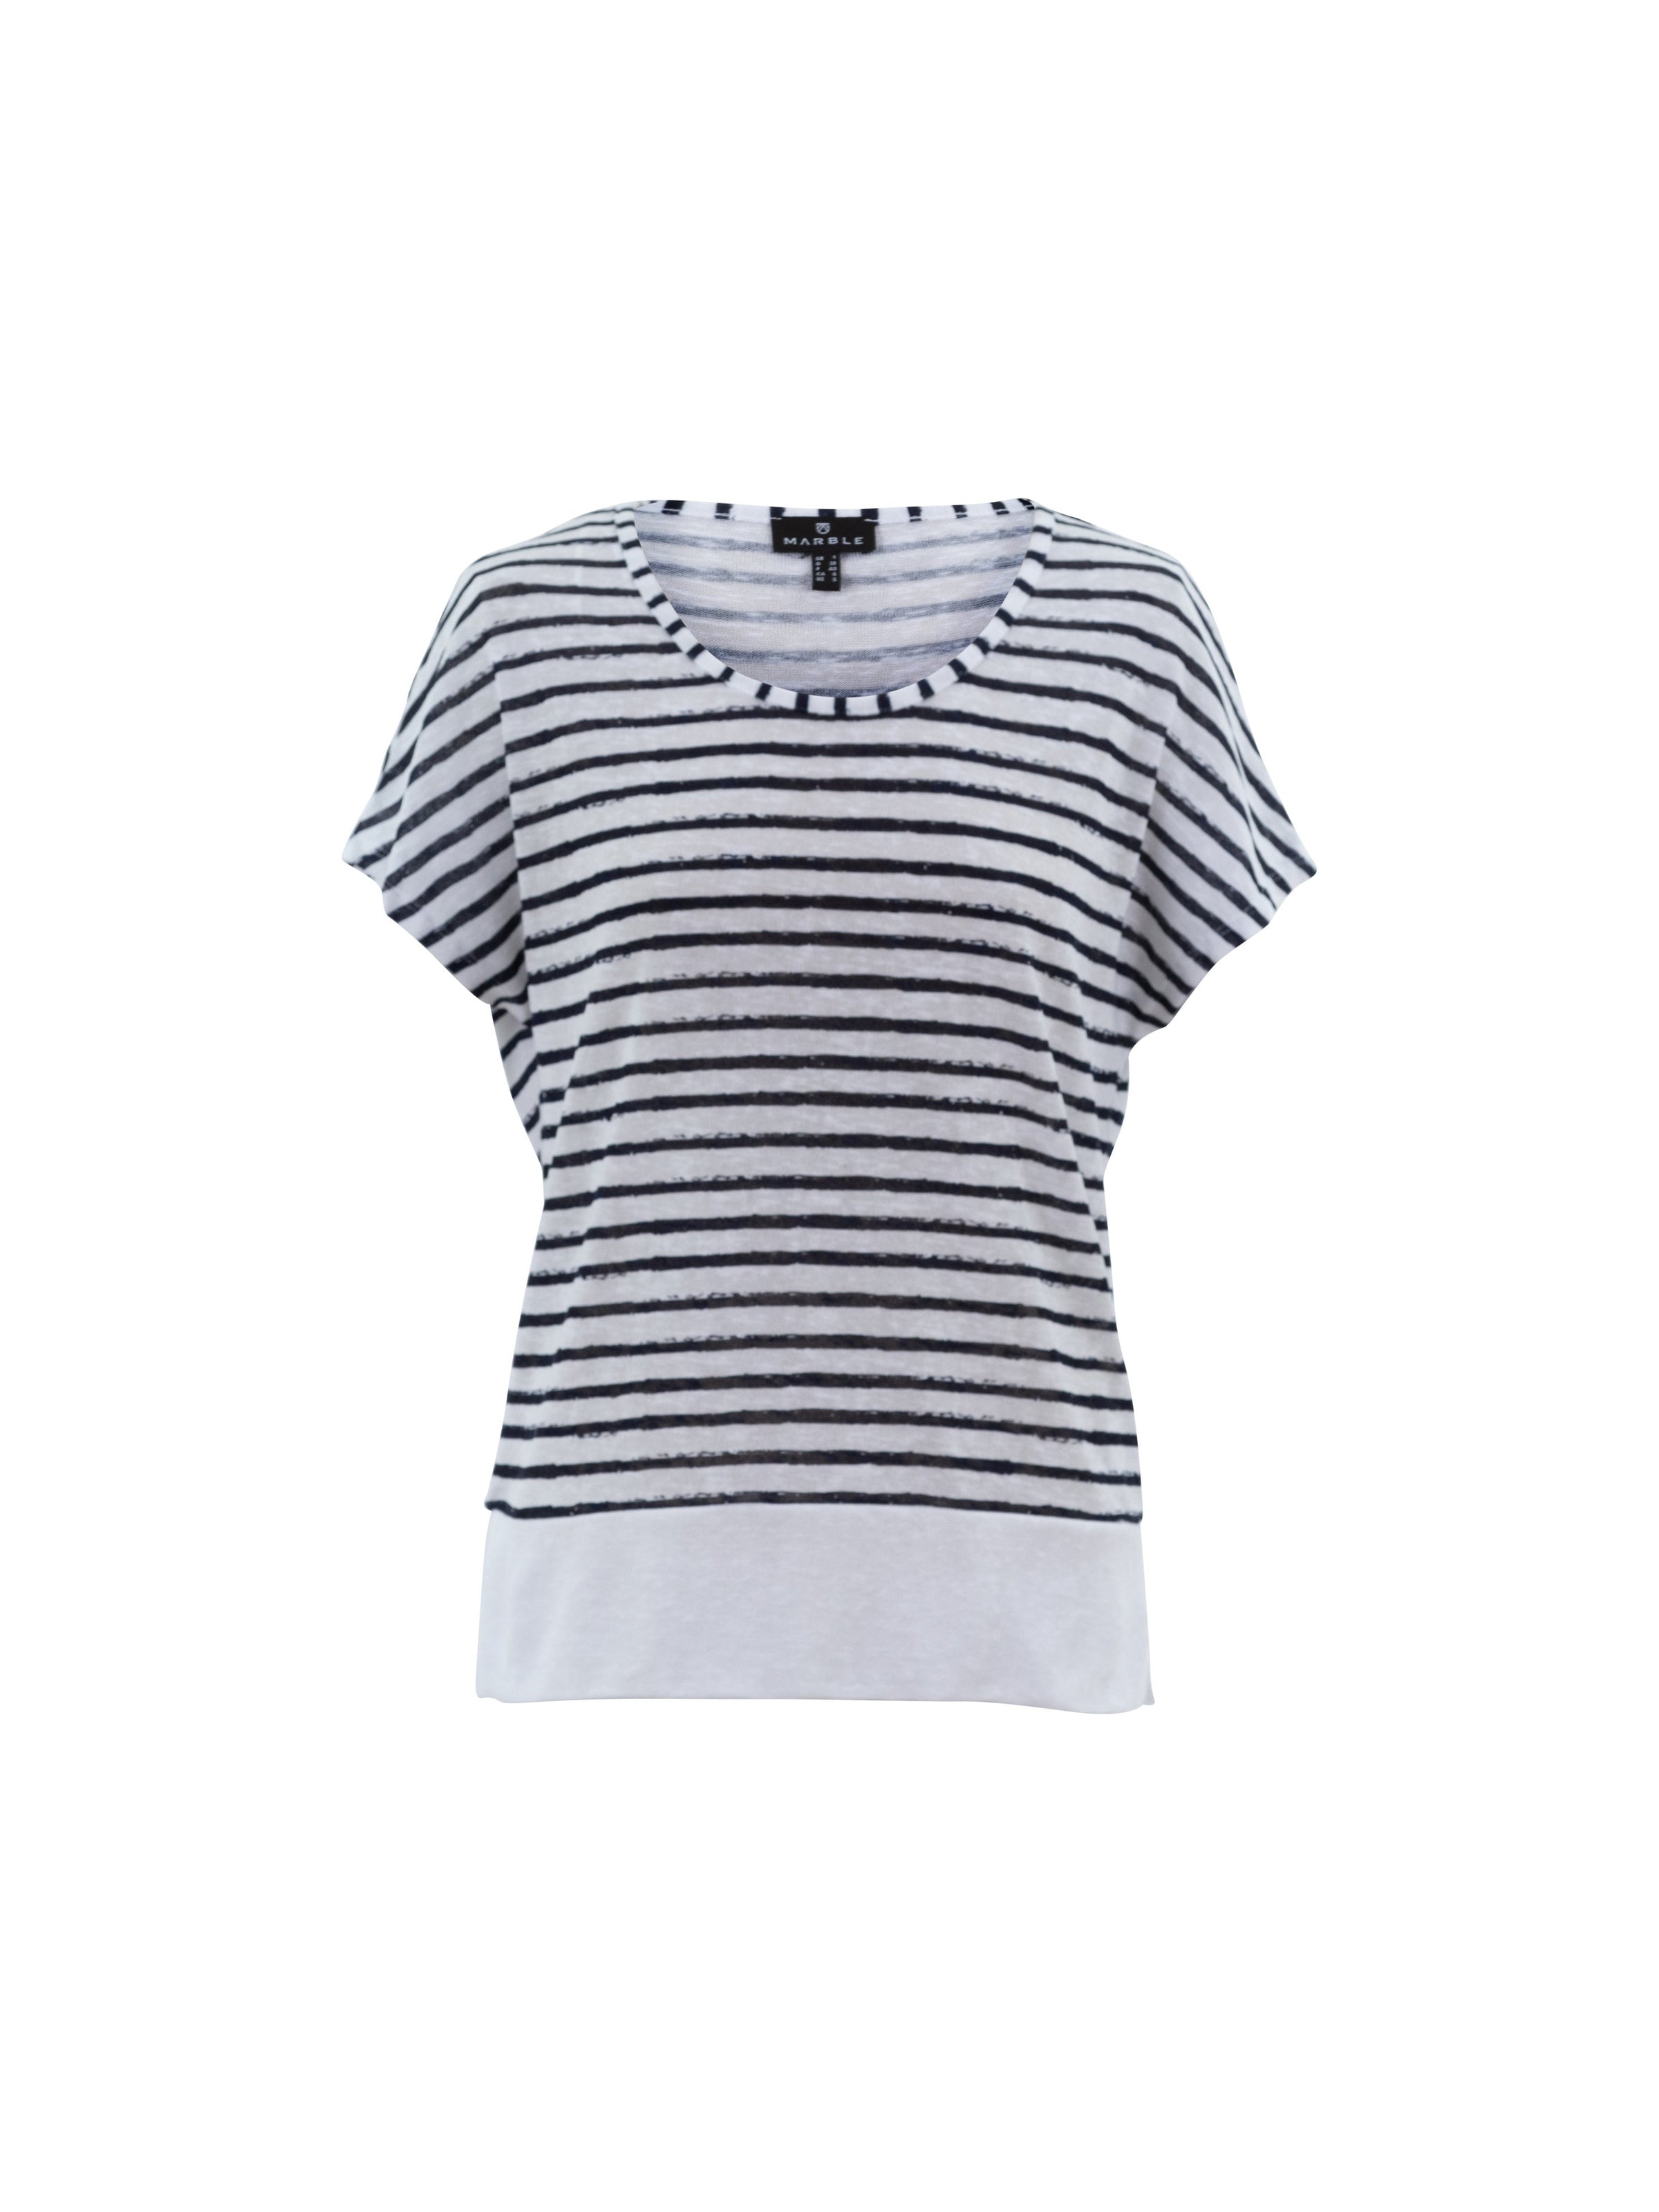 Marble Navy and White Striped Short Sleeve Top